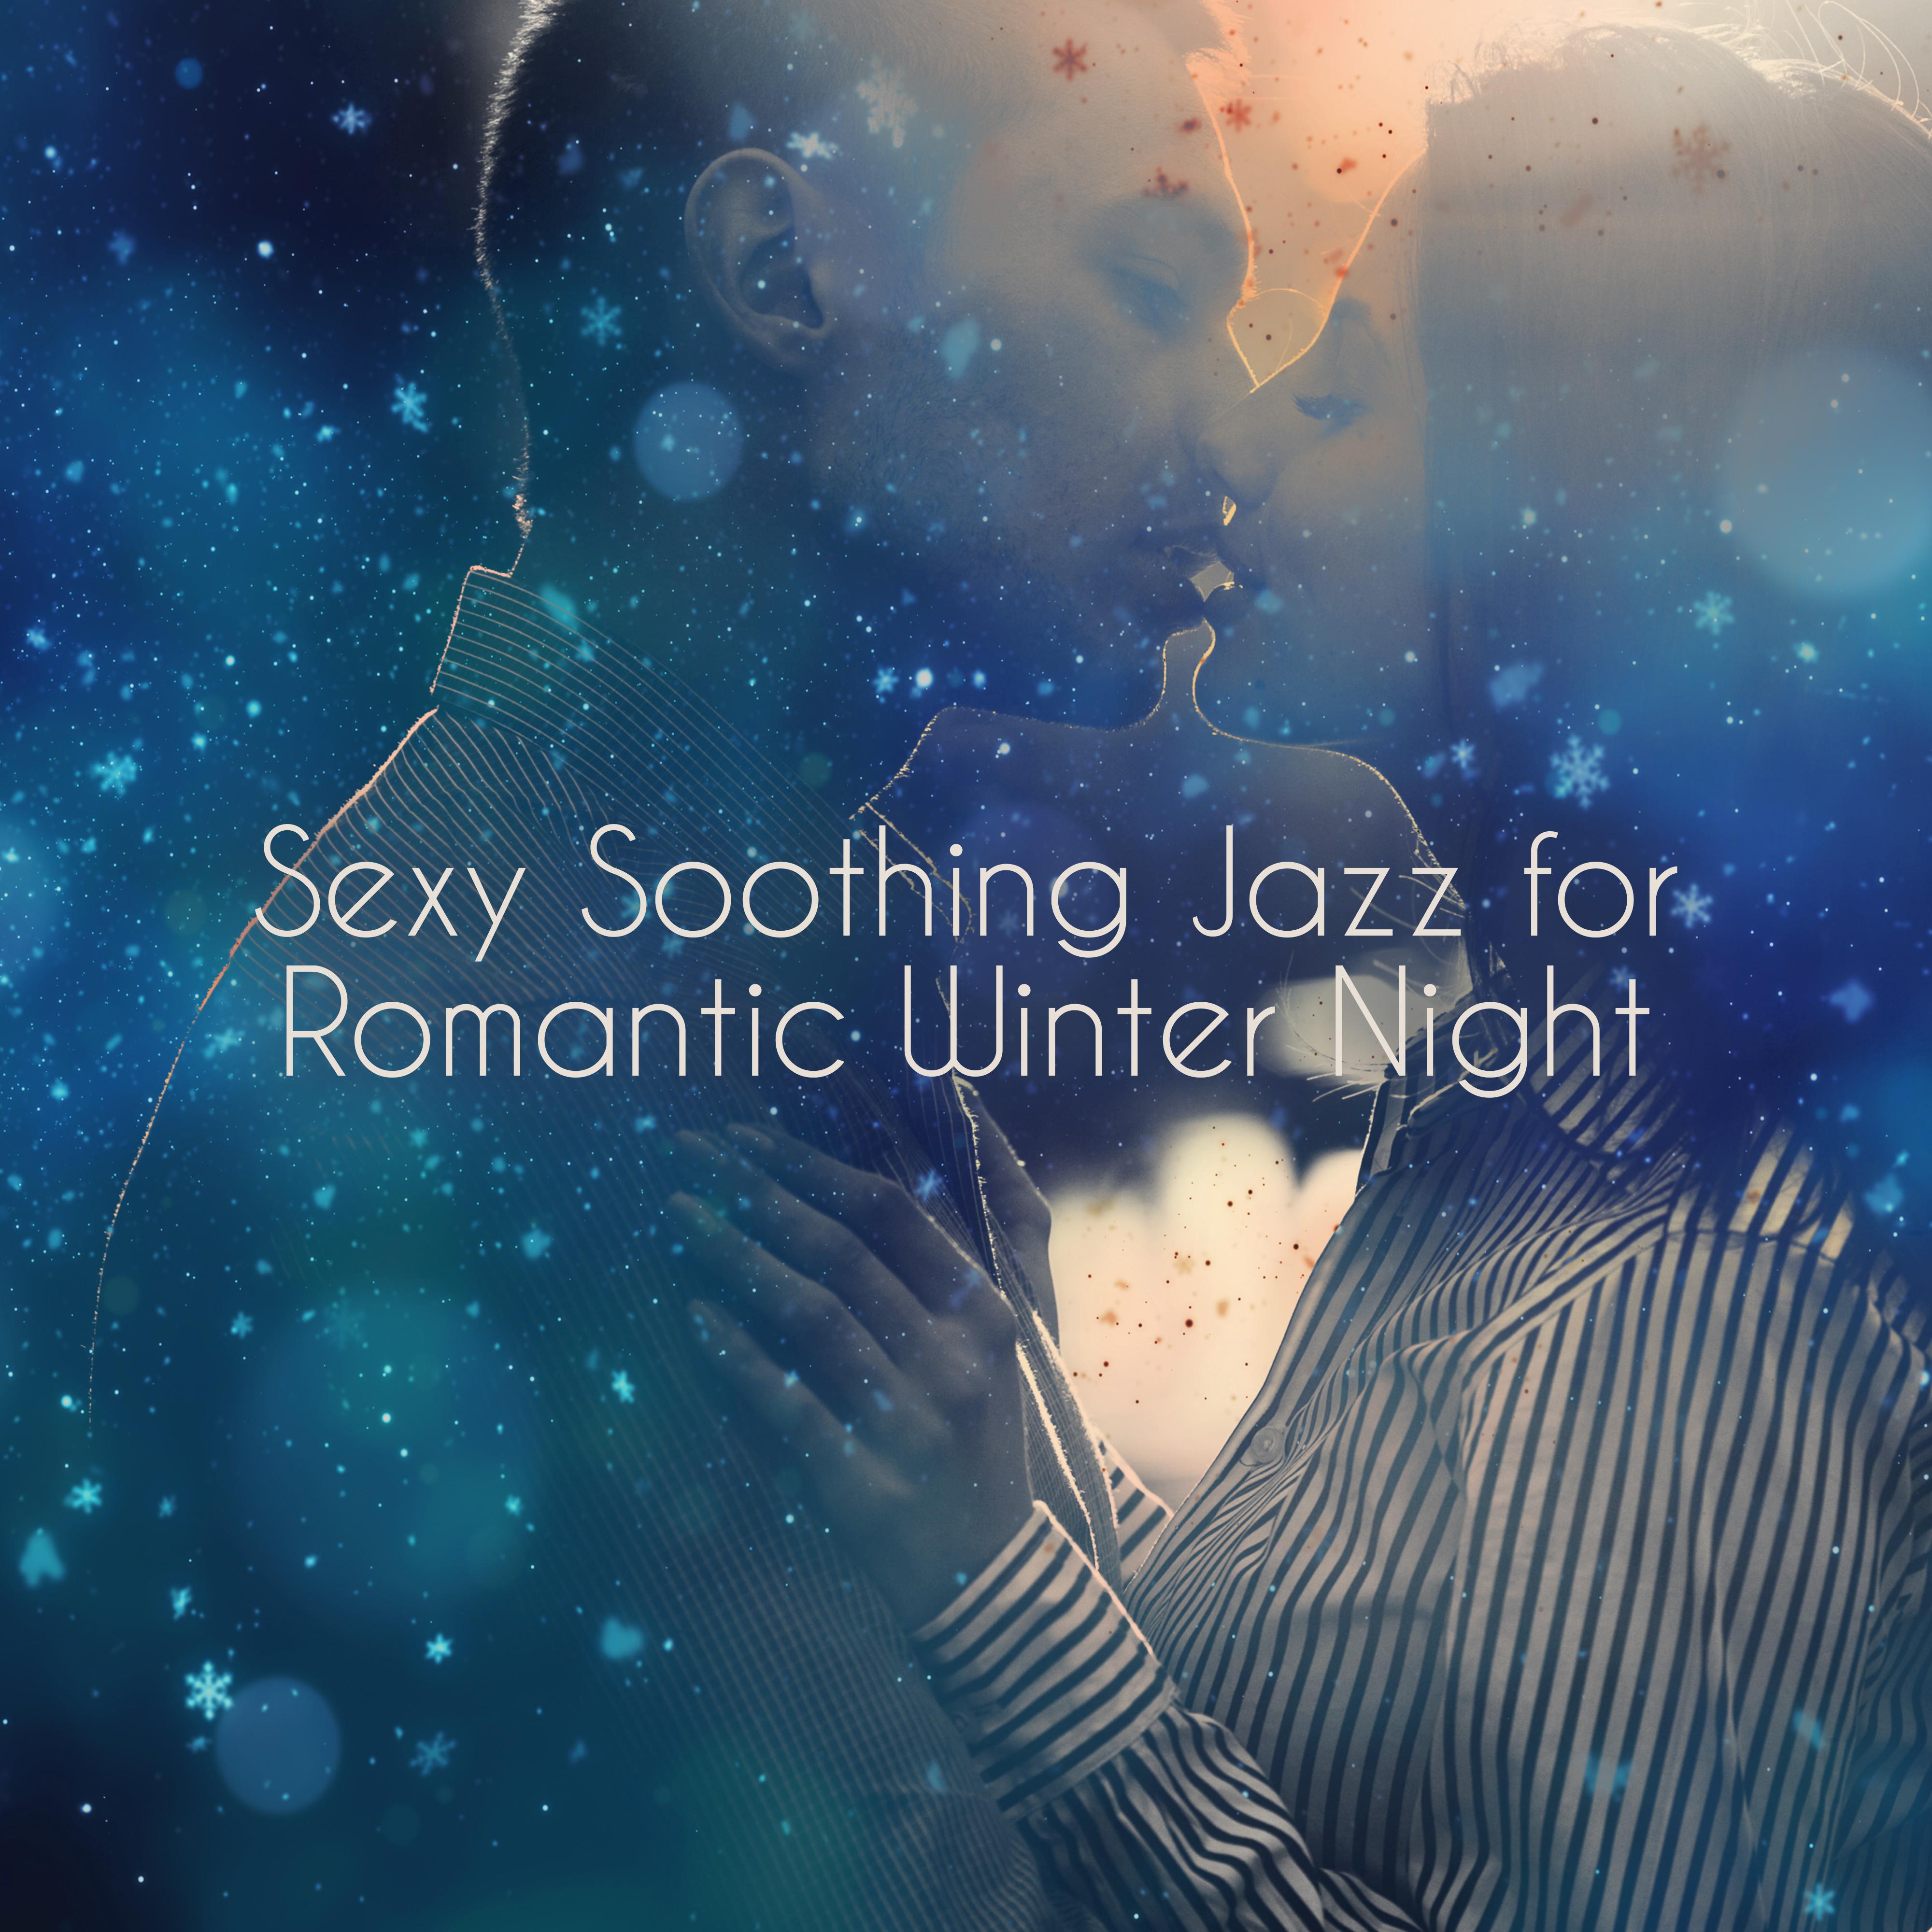 **** Soothing Jazz for Romantic Winter Night